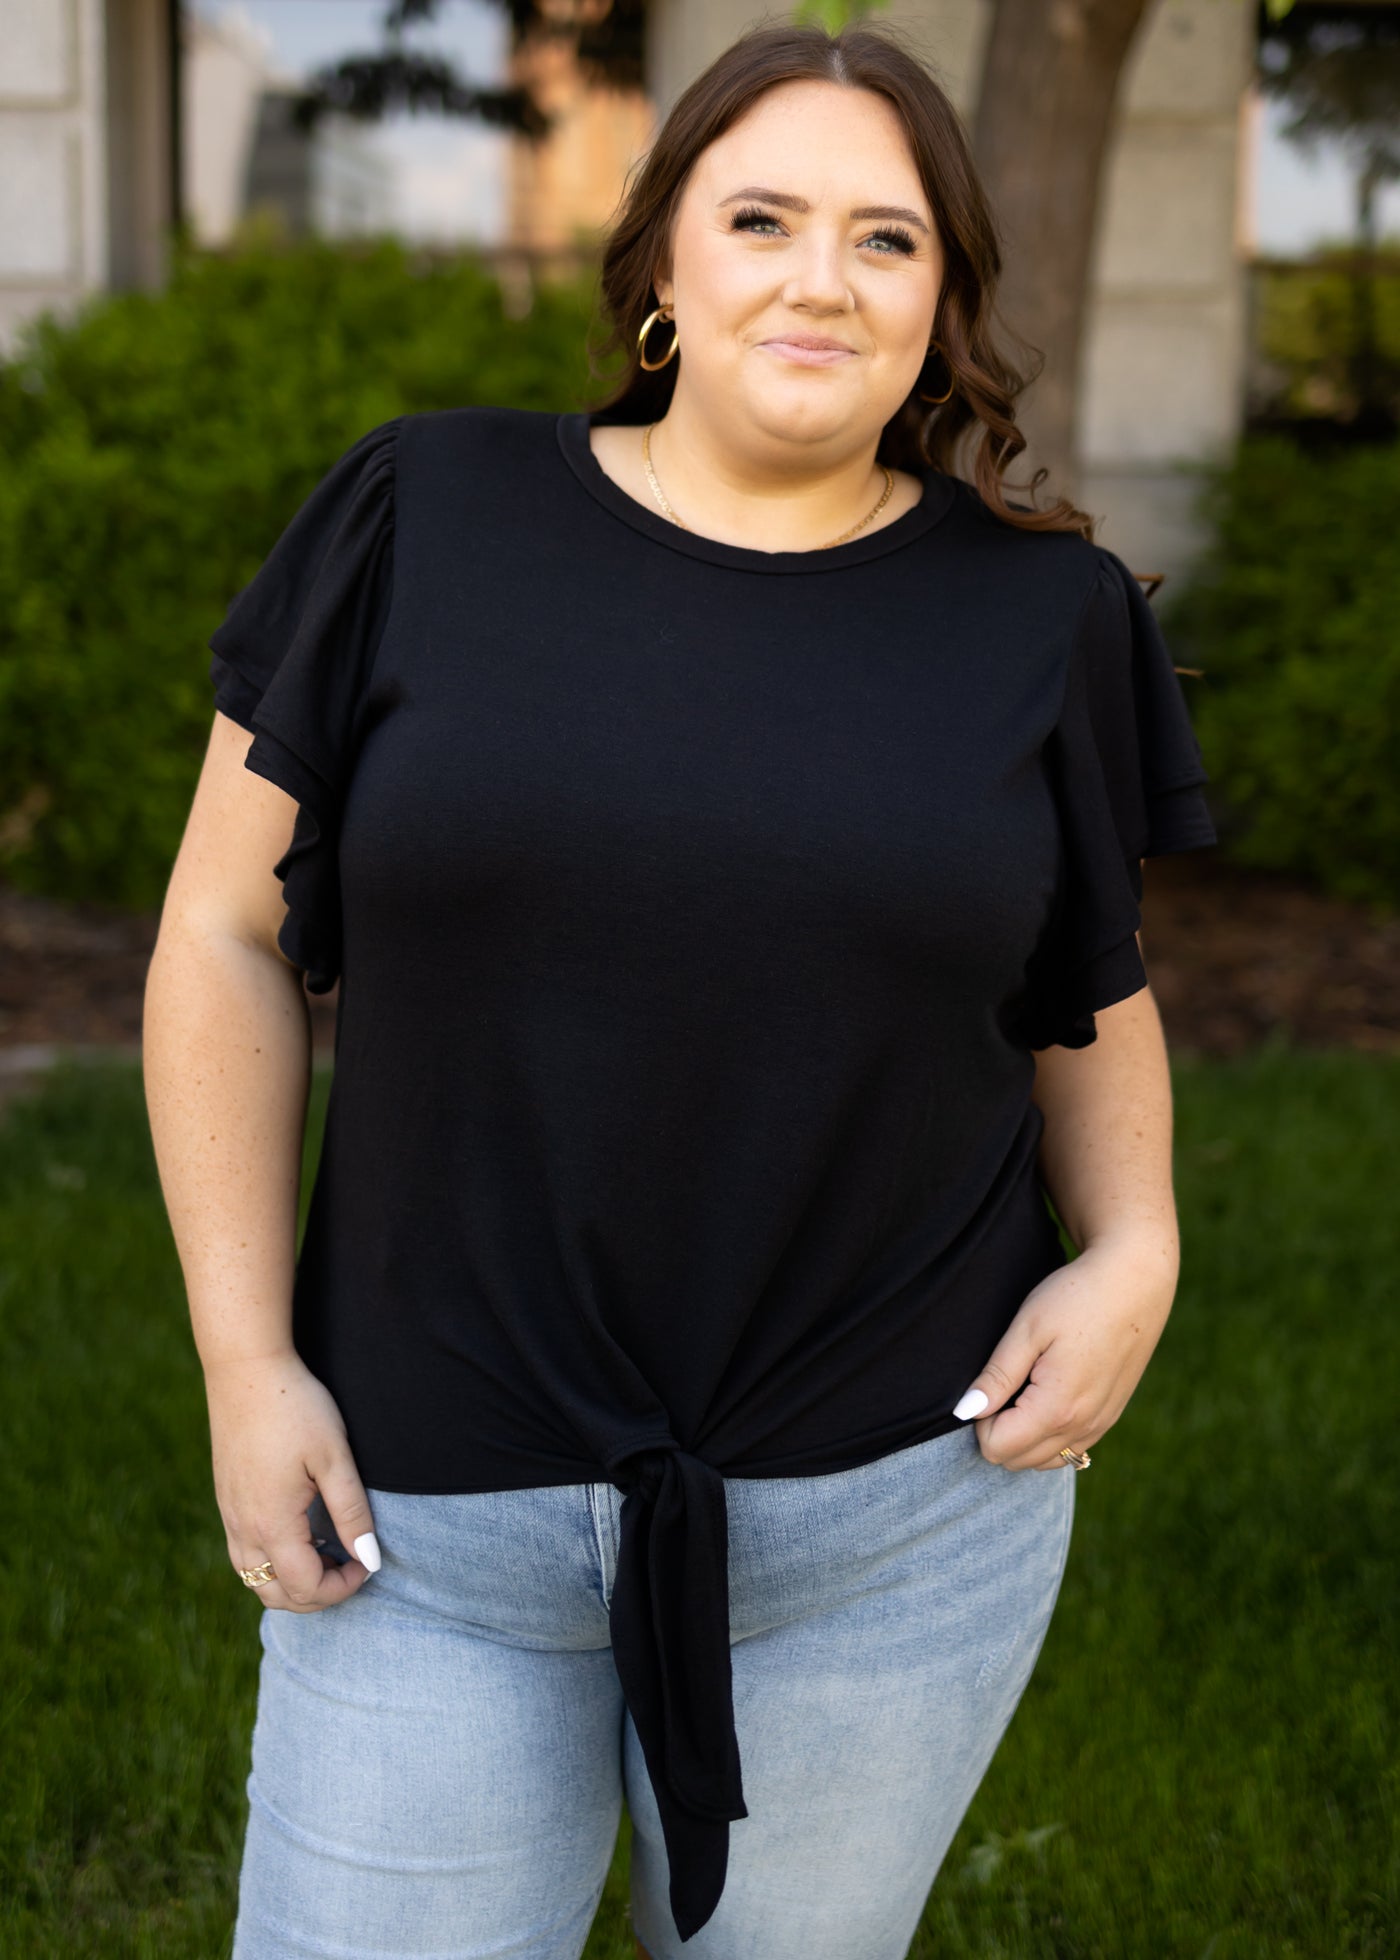 Plus size short sleeve black top that ties at the waist